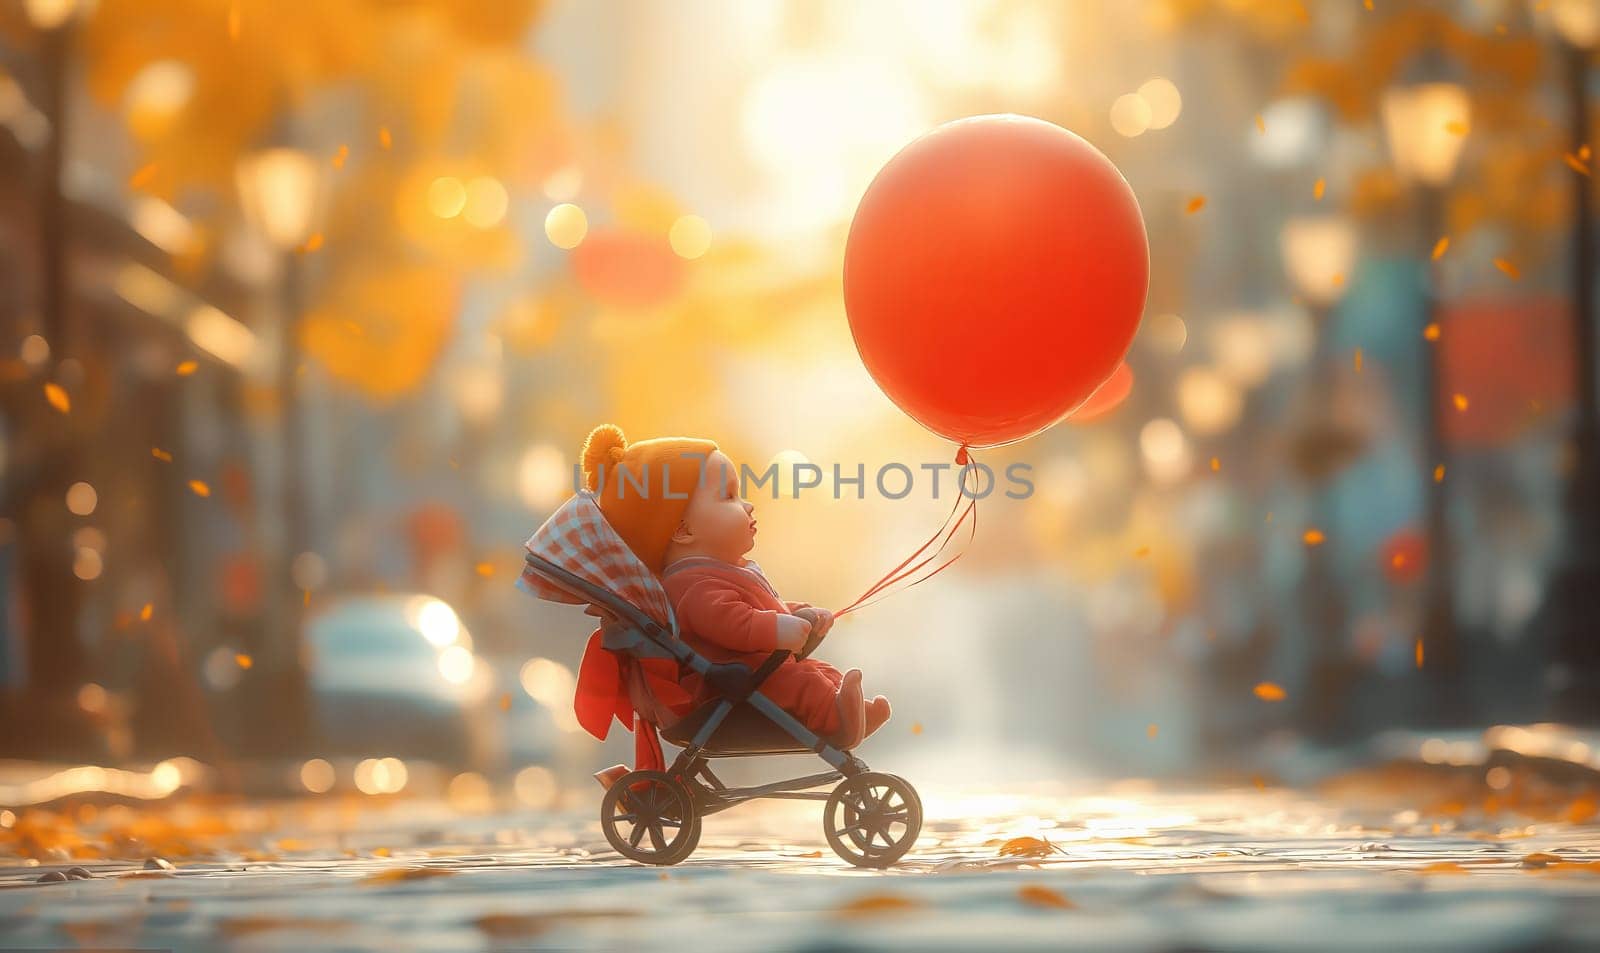 Illustration of a child sitting in a stroller in nature. Selective soft focus.